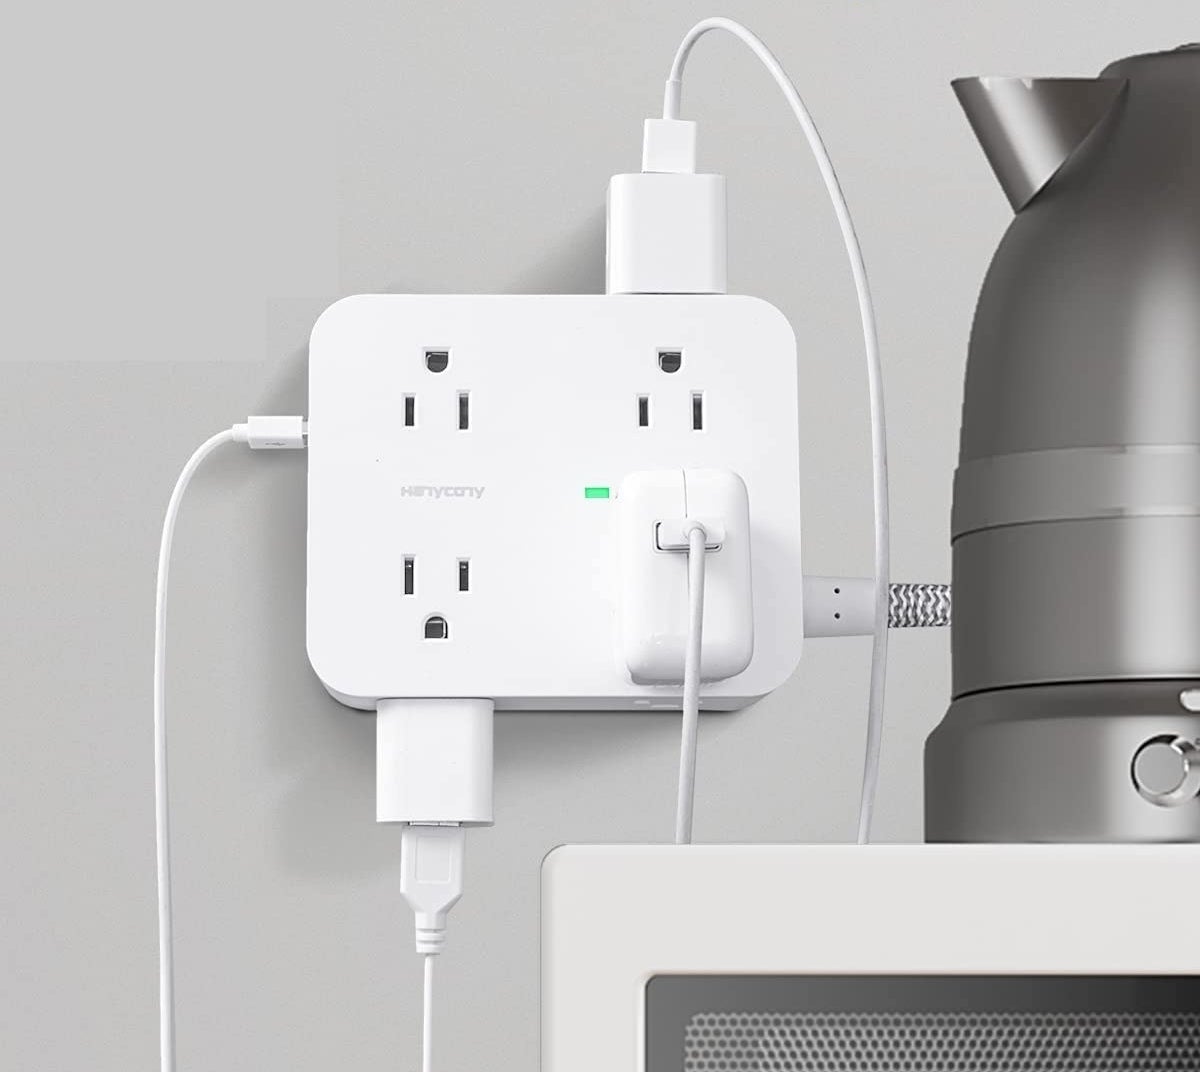 the three-sided surge protected power bar plugged into a wall